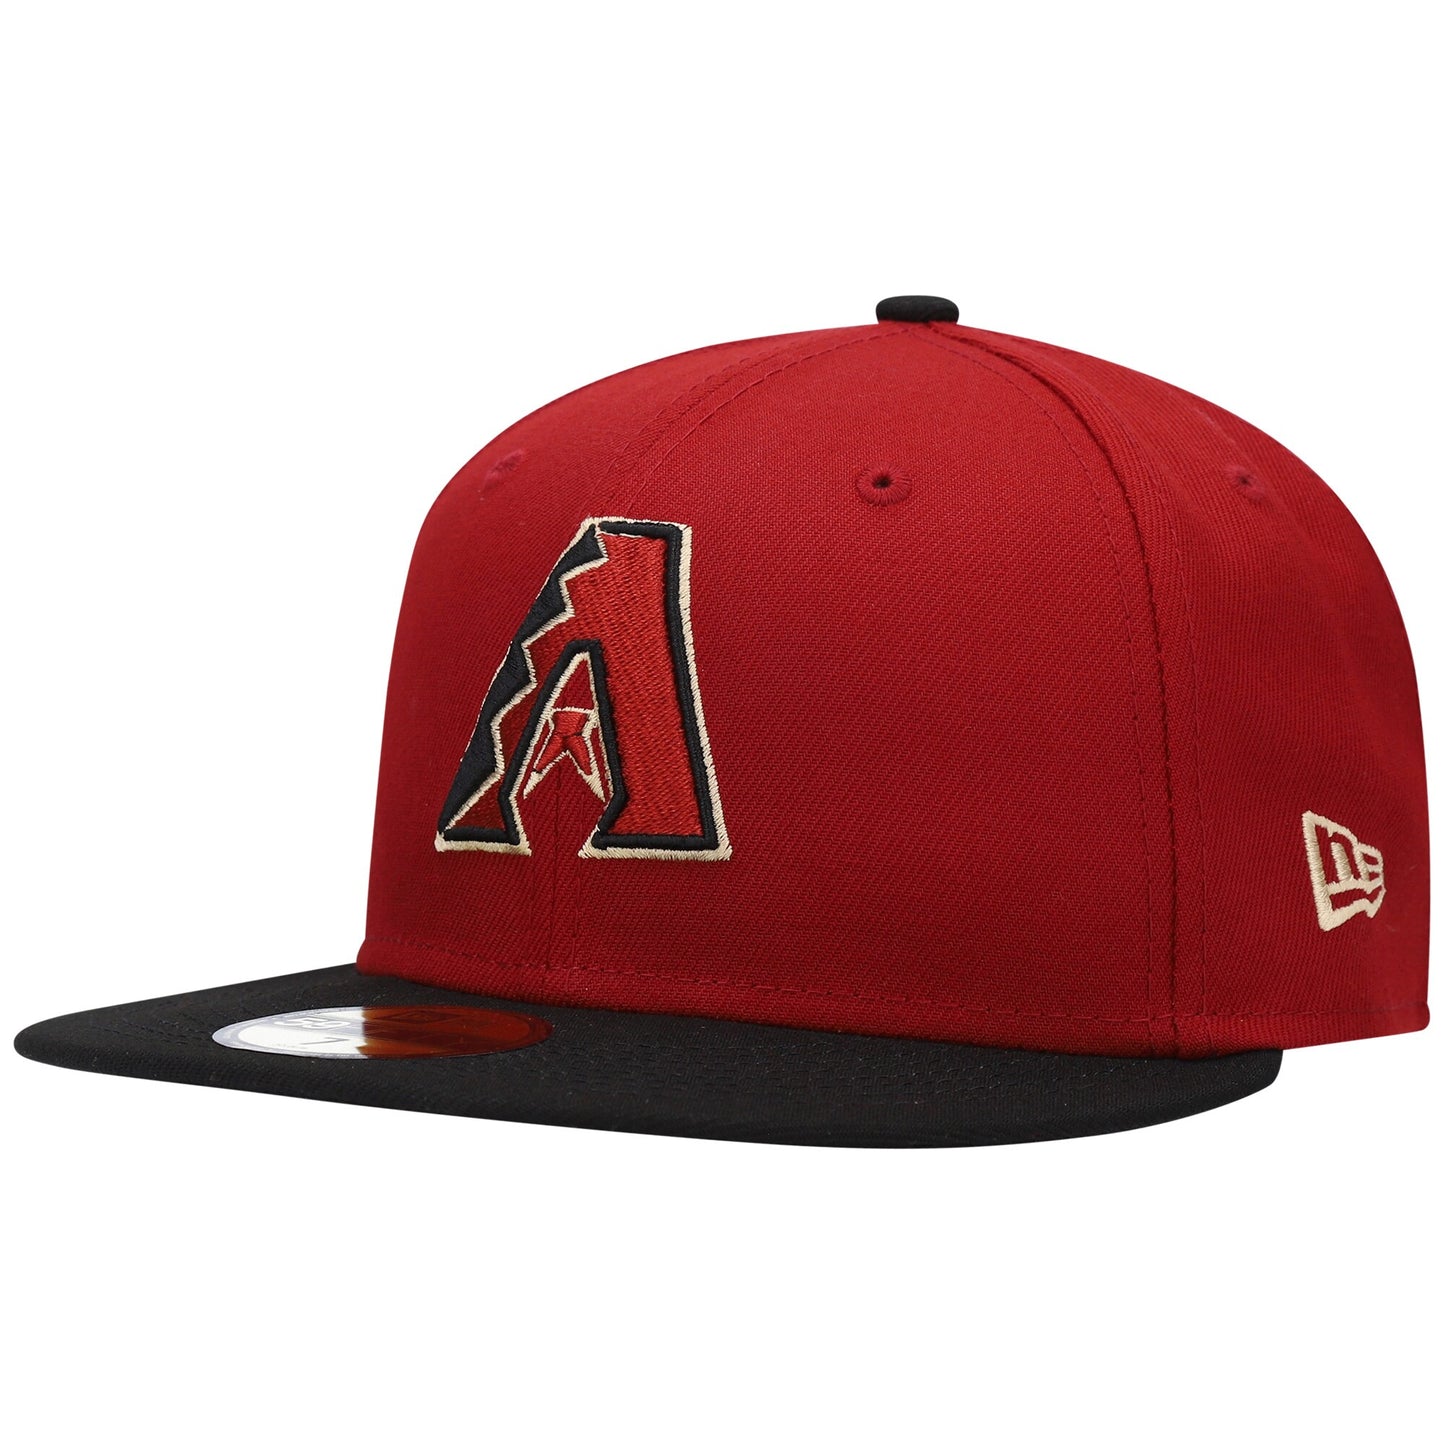 Arizona Diamondbacks New Era On-Field Alternate Authentic Collection 59FIFTY Fitted Hat - Red